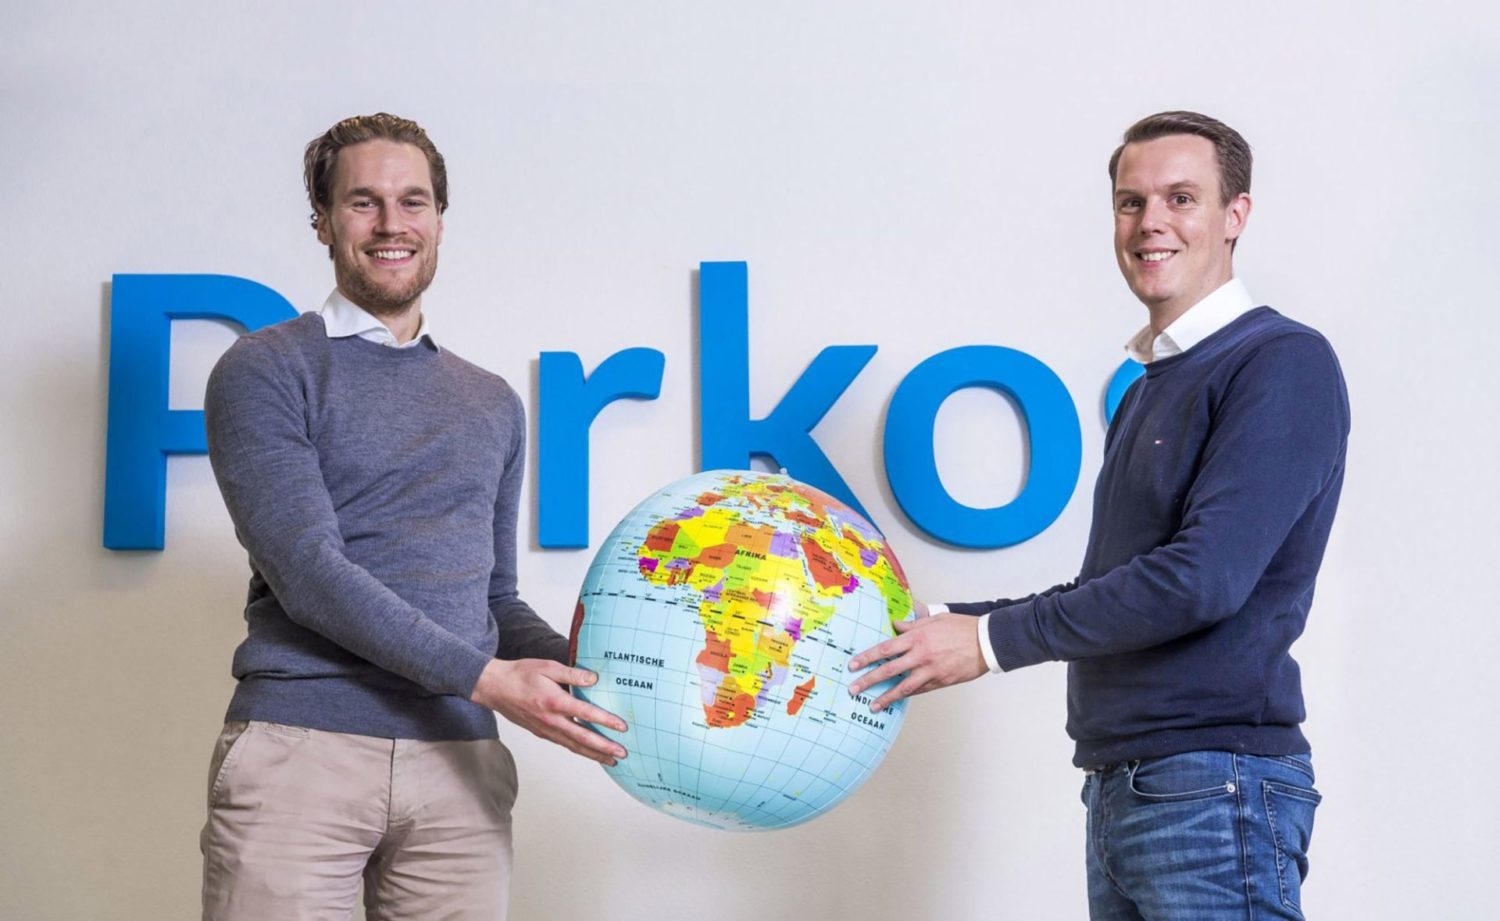 Fast-growing Parkos aims to become global market leader